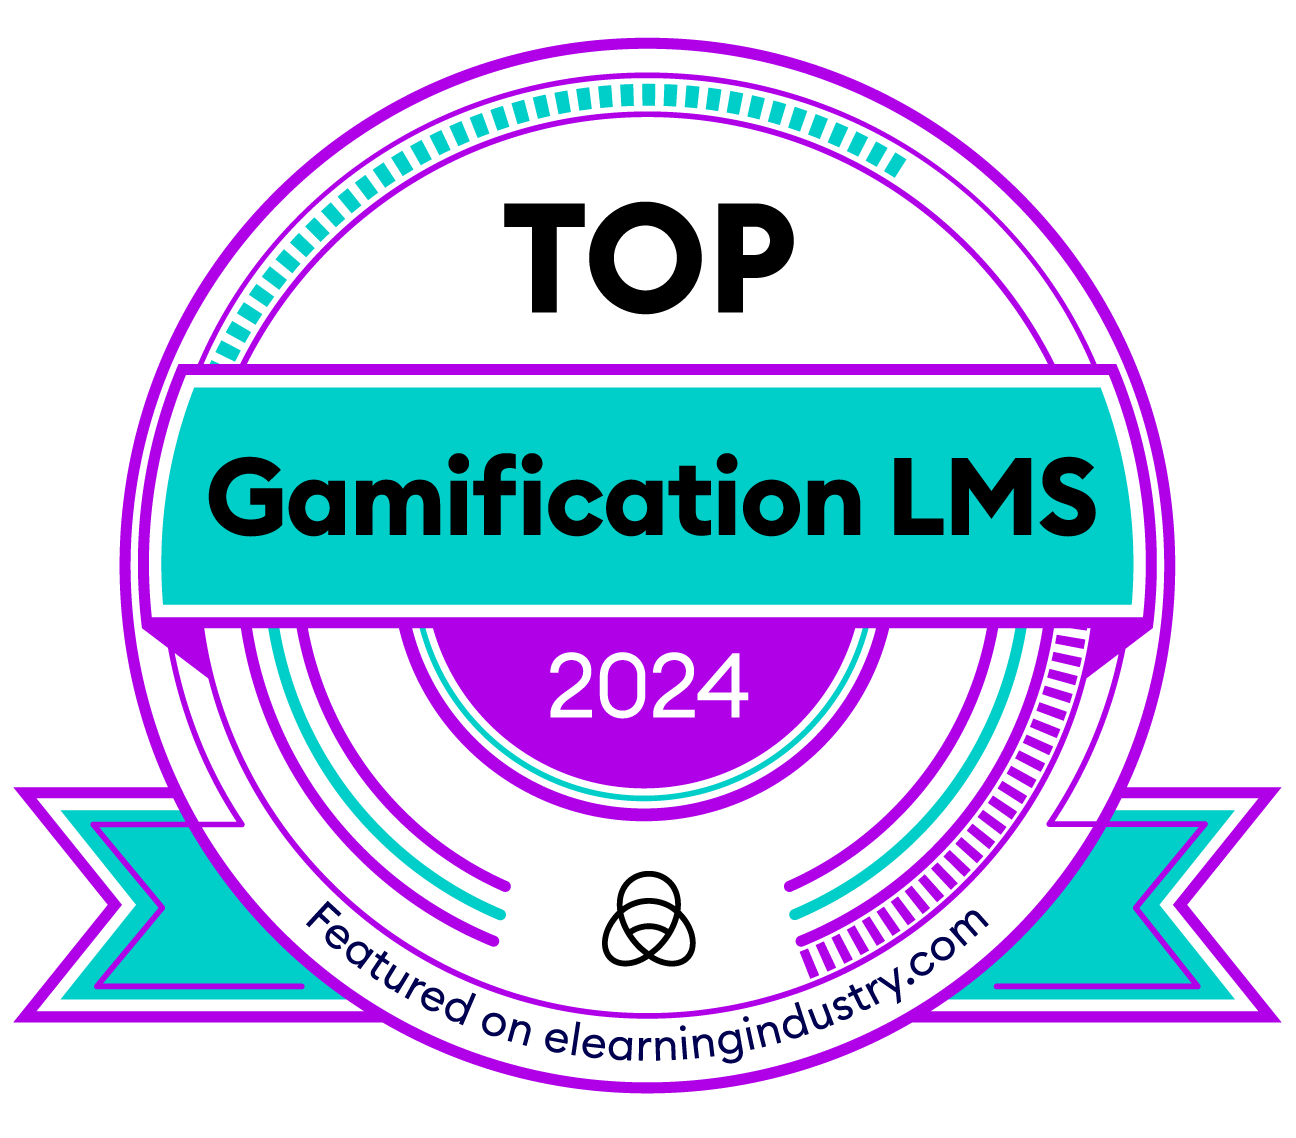 Top Gamification LMS badge